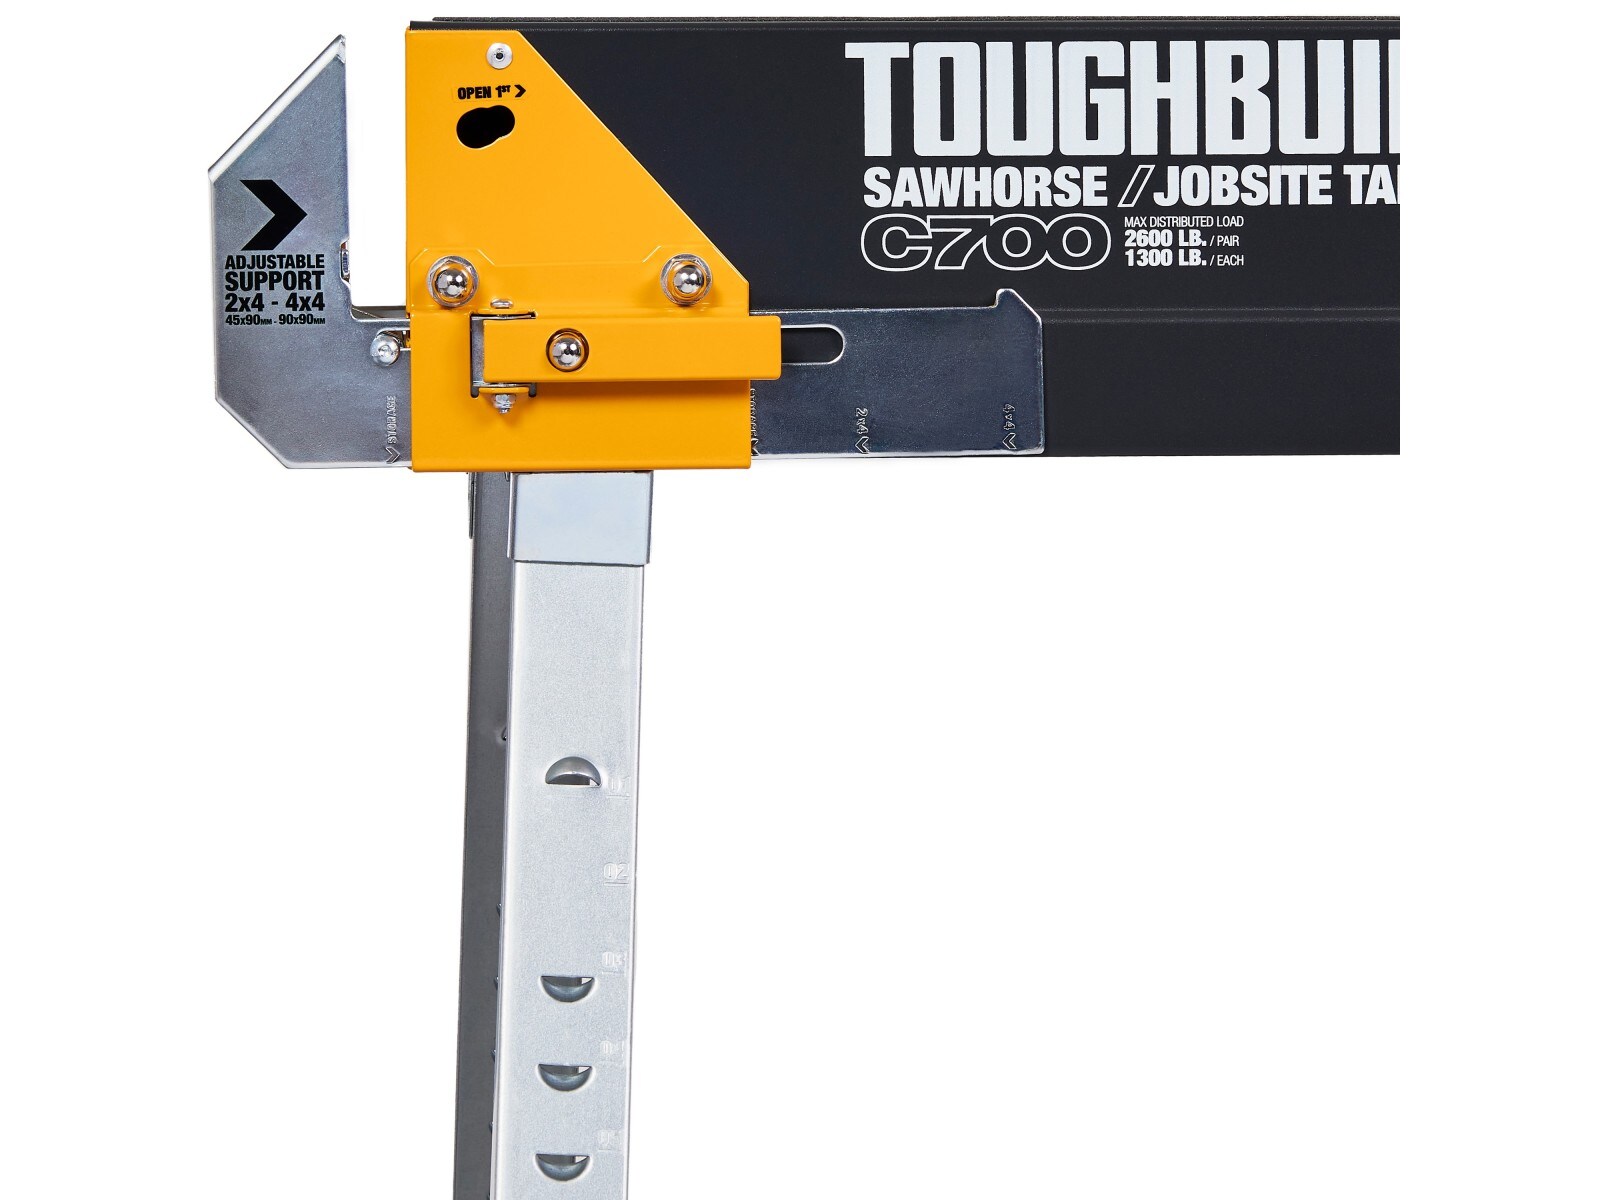 TOUGHBUILT 40-in W x 25-in H Adjustable Steel Saw Horse (1300-lb Capacity)